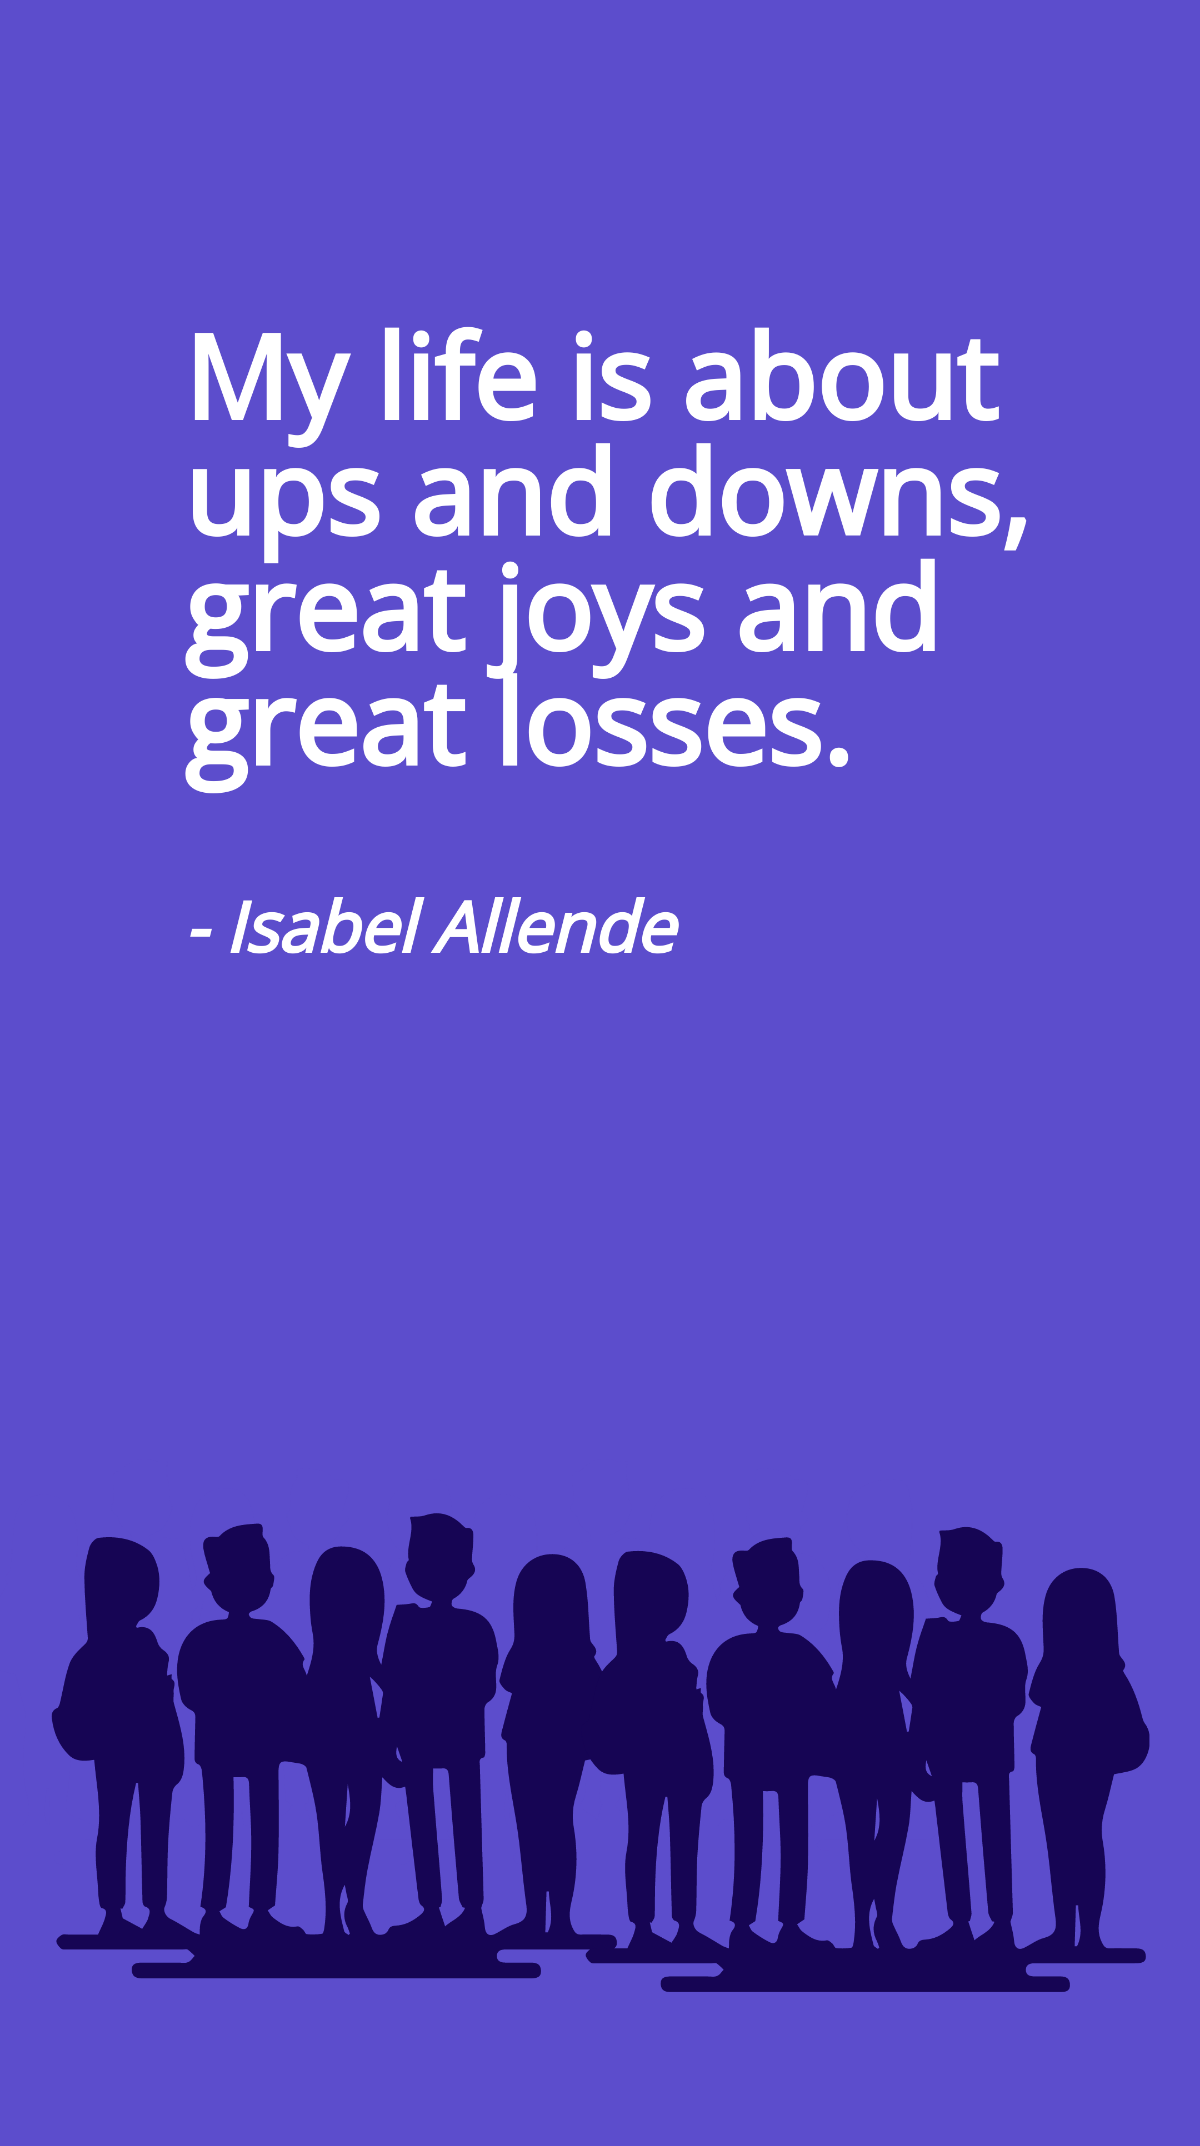 Isabel Allende - My life is about ups and downs, great joys and great losses. Template